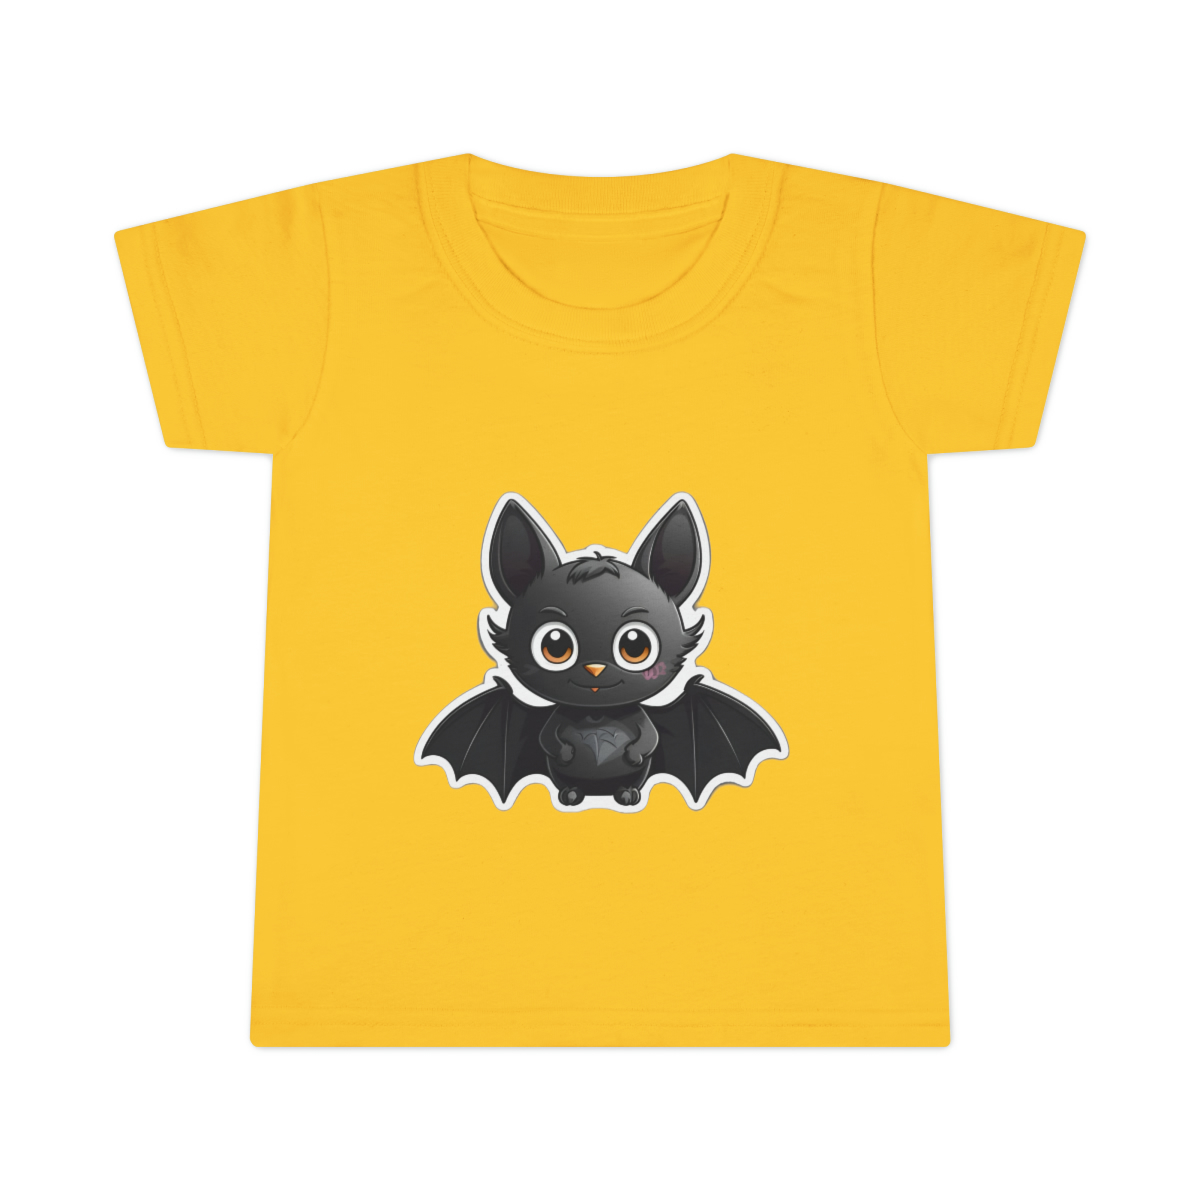 Primary image for Personalized Toddler T-shirt: Cute Cartoon Bat Design, 100% Ringspun Cotton, Cla